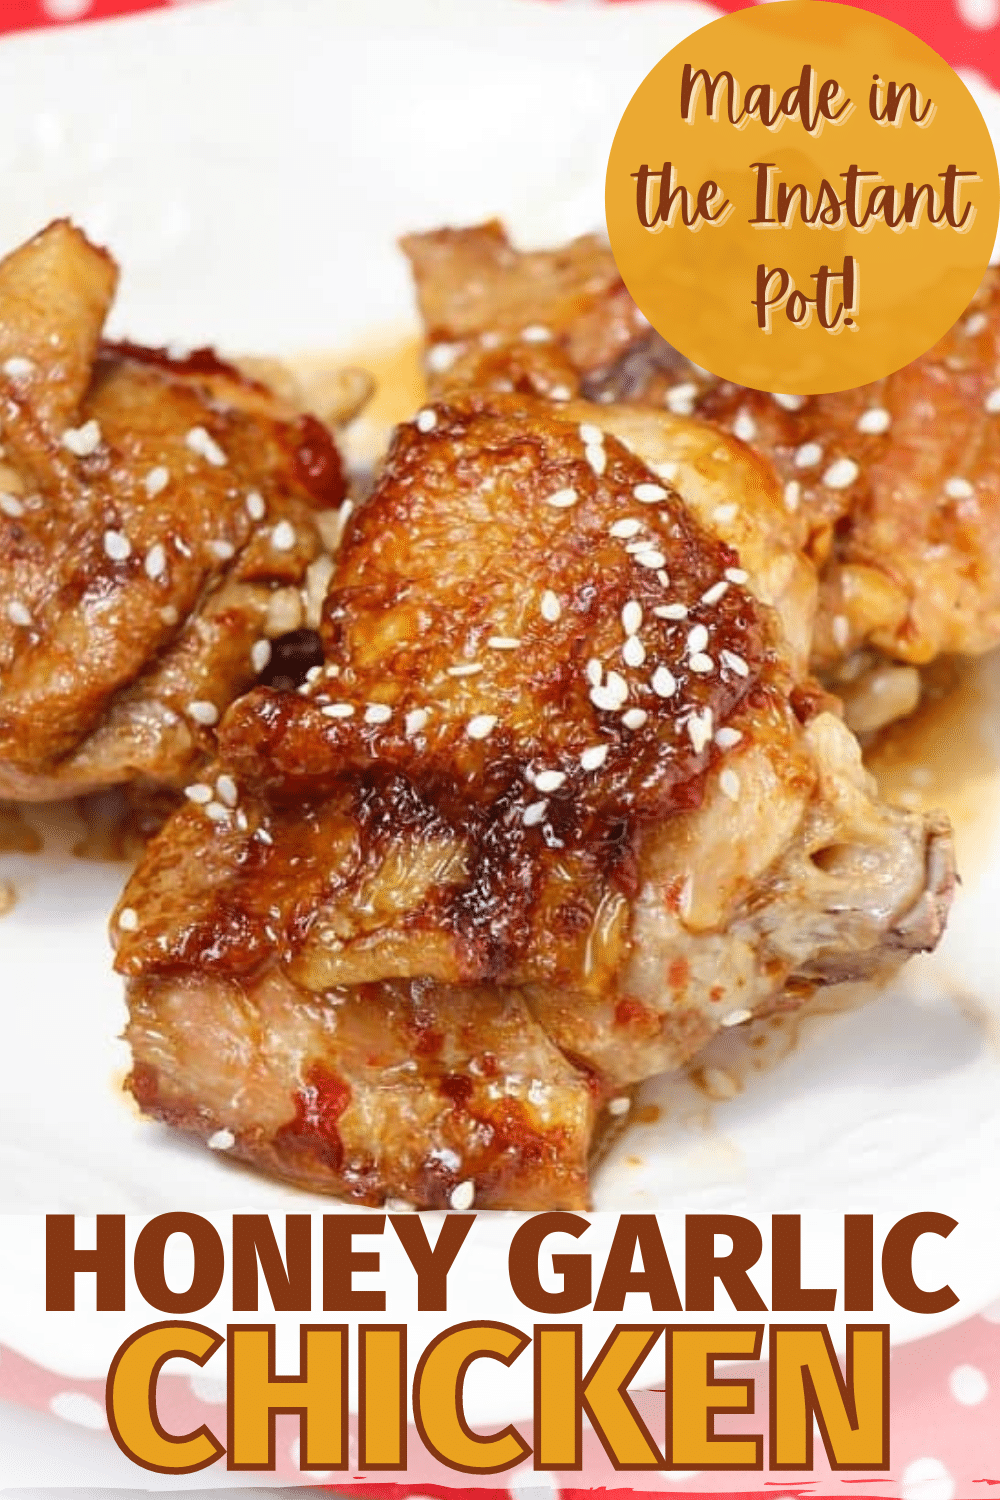 Instant Pot Honey Garlic Chicken is an easy, kid-friendly dinner that is full of flavor. It's a healthier alternative to Chinese takeout and just as tasty. #instantpot #pressurecooker #chicken #garlic via @wondermomwannab